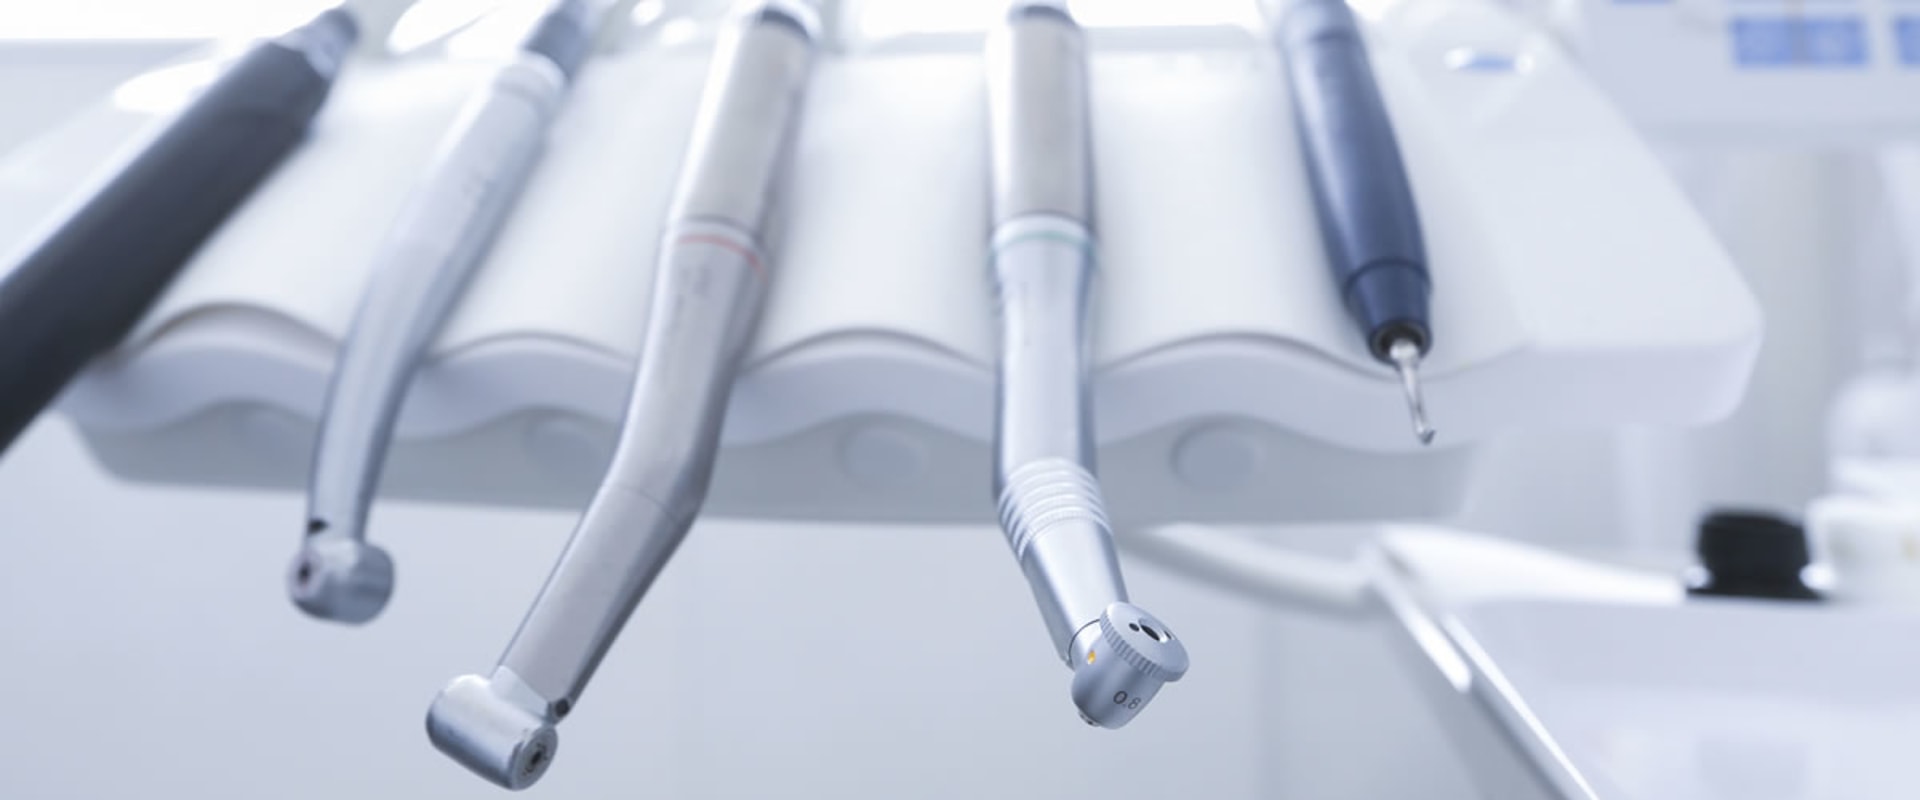 What Tools Does a Dentist Use? A Comprehensive Guide